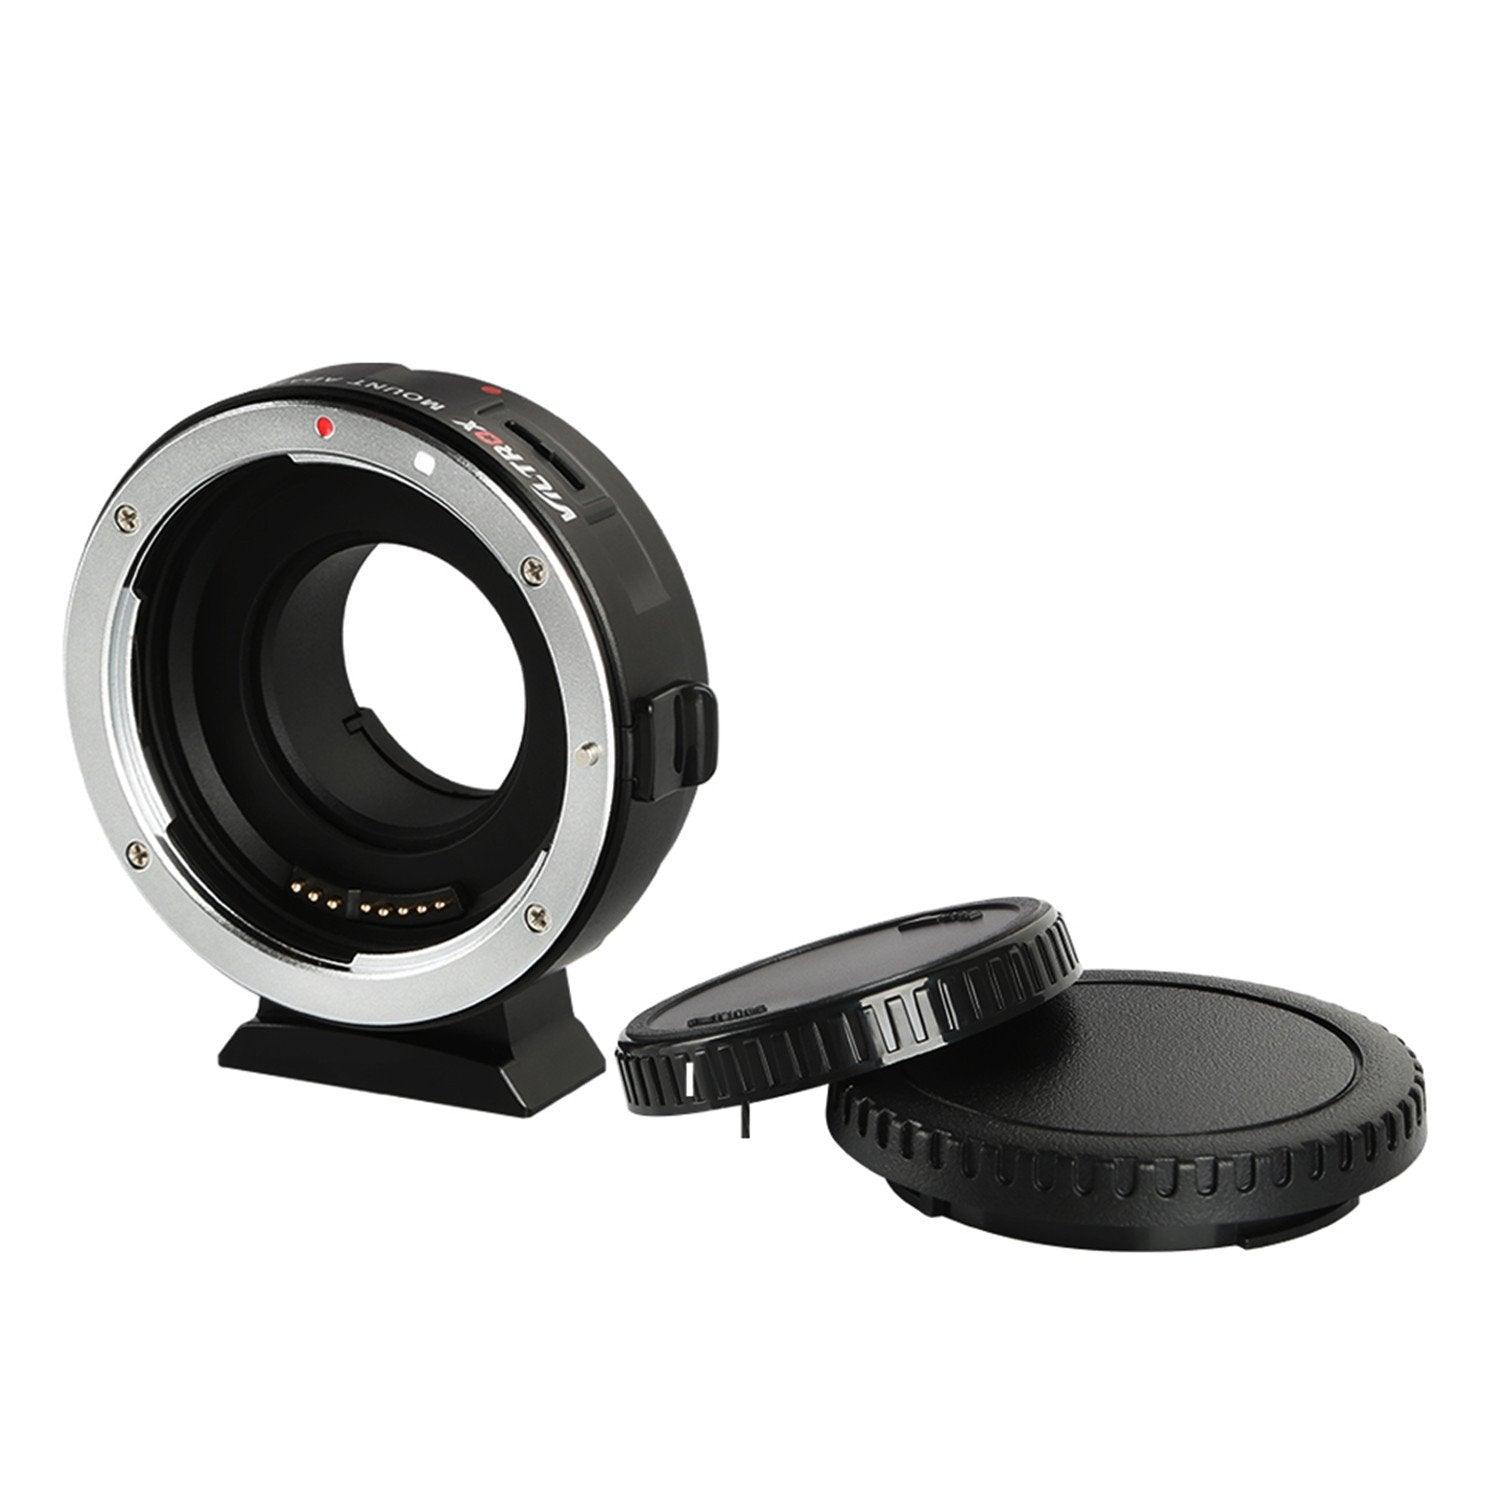 VILTROX EF-M1 Auto Focus Exif Lens Adapter for Canon EOS EF EF-S Lens to Micro Four Thirds EF-M43 cameras Camera GH4 GH5 GF6 GF1 GX1 GX7 E-M5 E-M10 E-PL5 - Digitek